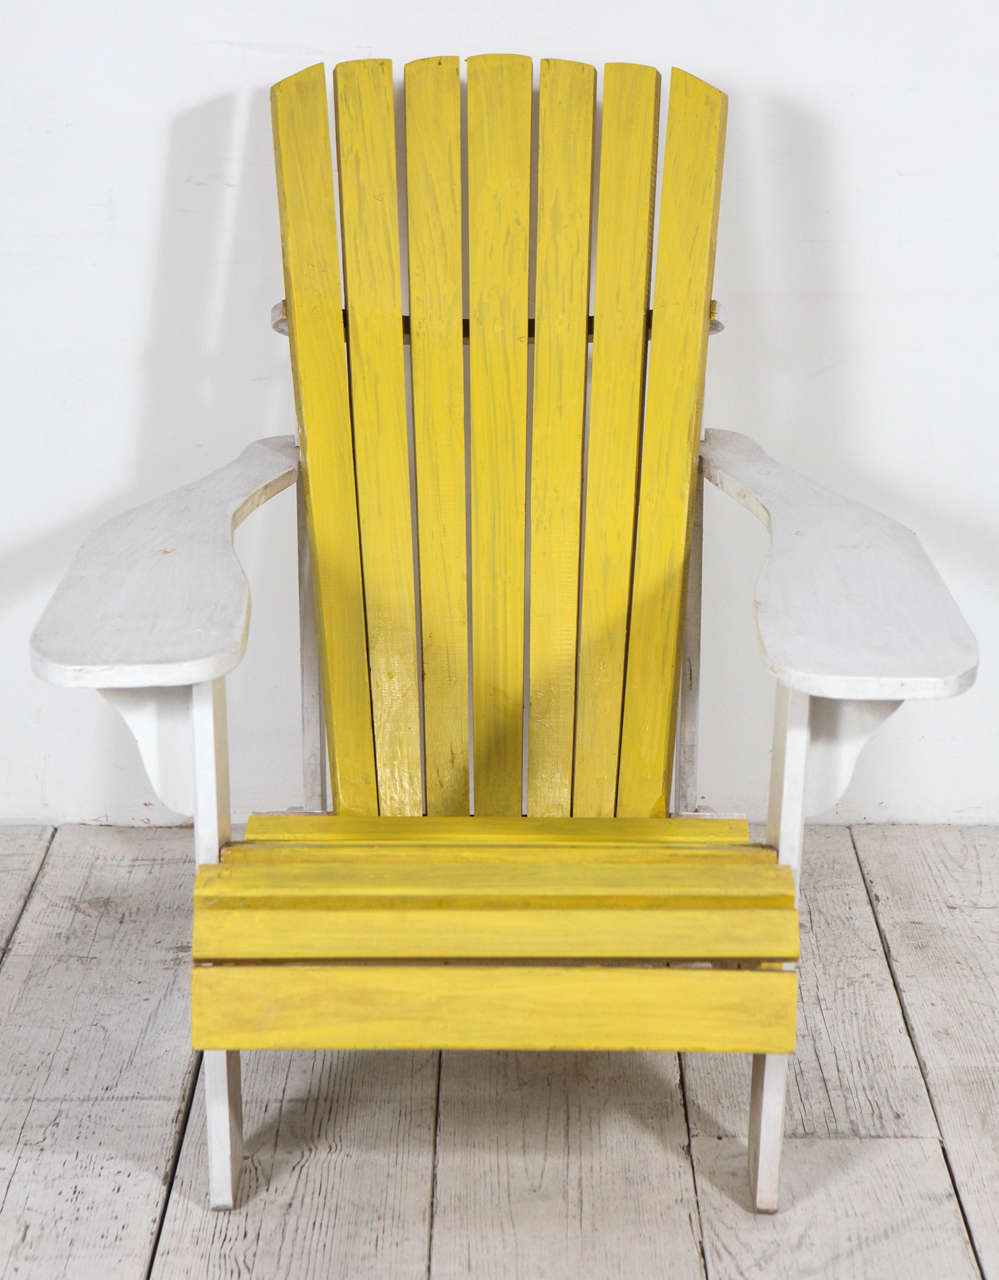 Classic silhouette in a bright color palette. Suited for outdoor use.